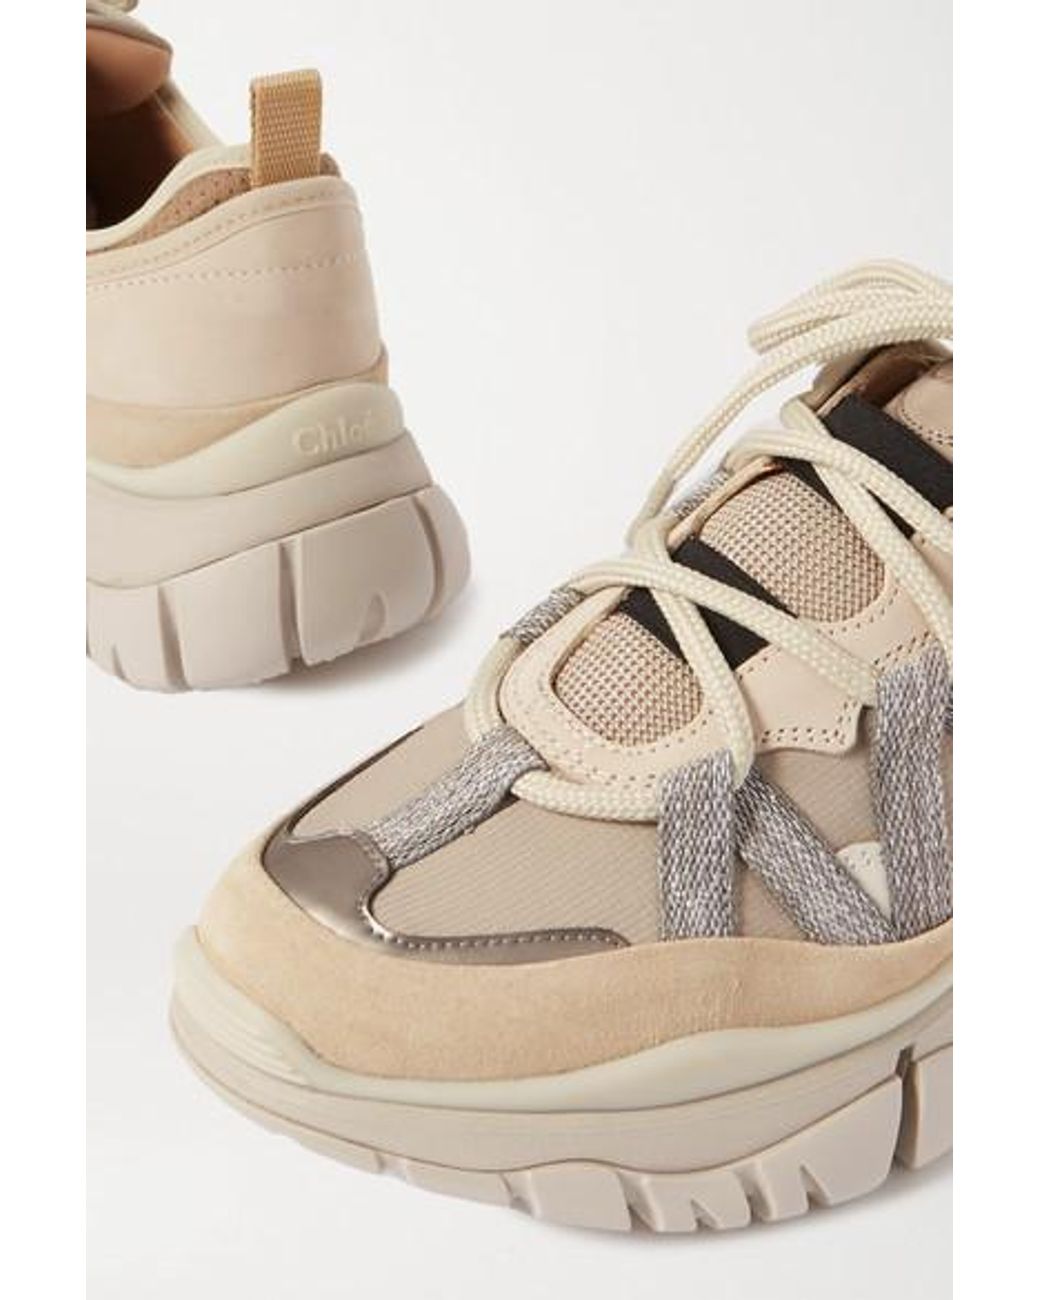 Chloé Blake Suede, Leather And Mesh Sneakers in Natural | Lyst